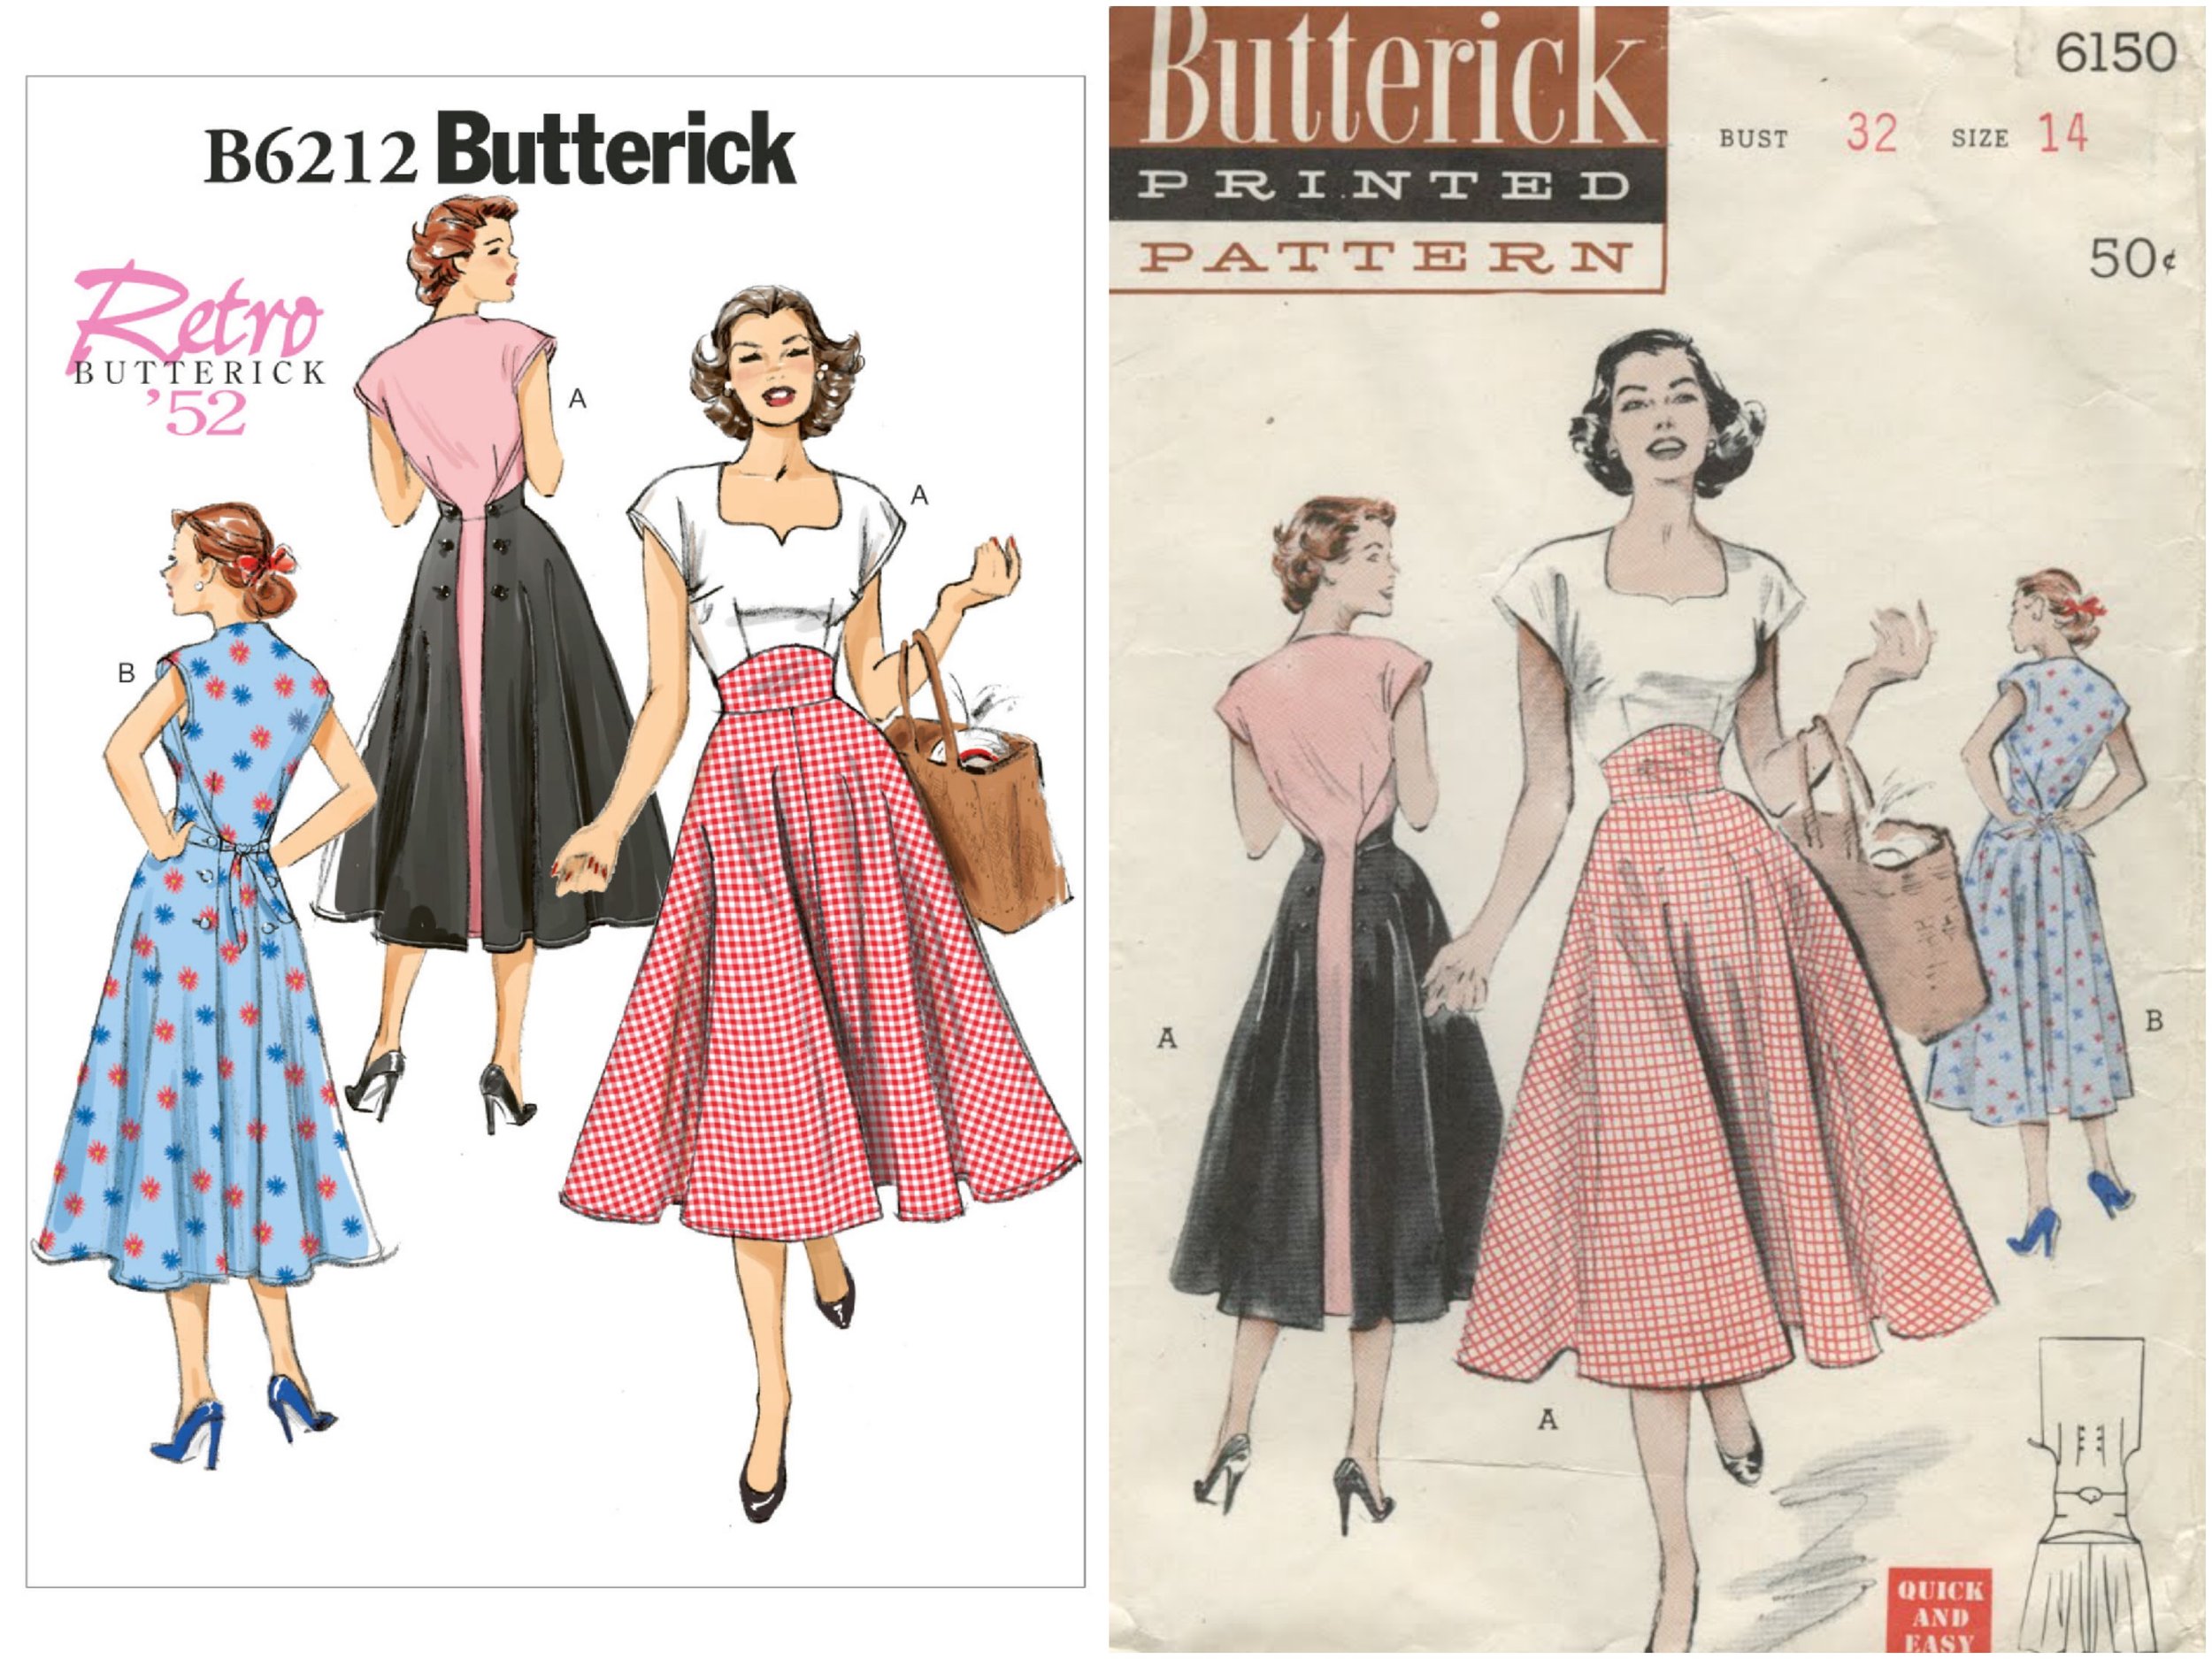 BACK WRAP DRESS BUTTERICK SEWING PATTERN 6212 MISSES SZ 6-14 RETRO 50s FLARED